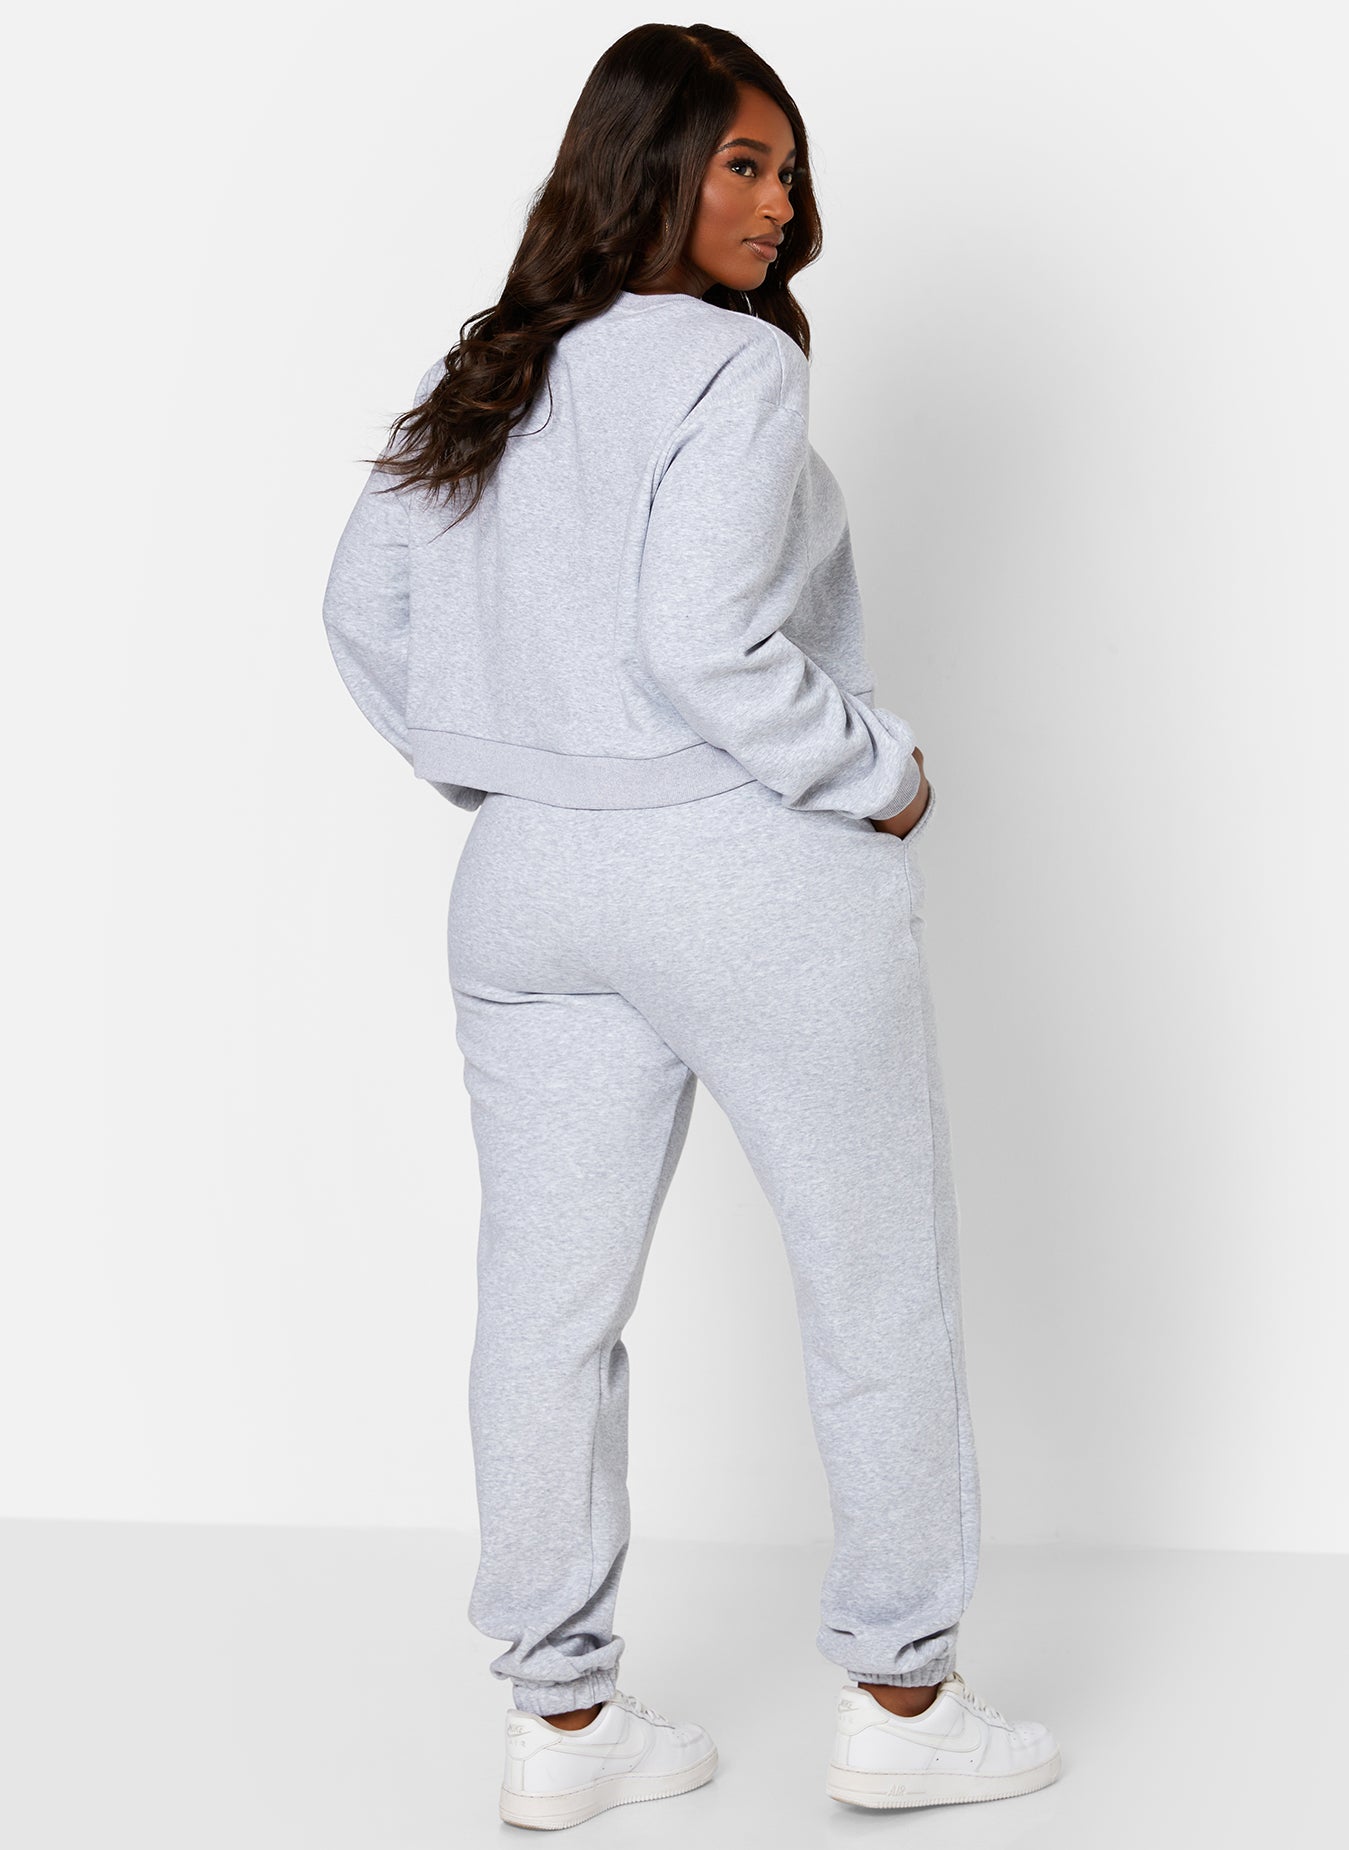 Heather Gray Guideline Embroidered Drawstring Jogger Sweatpants W. Pockets Plus Sizes